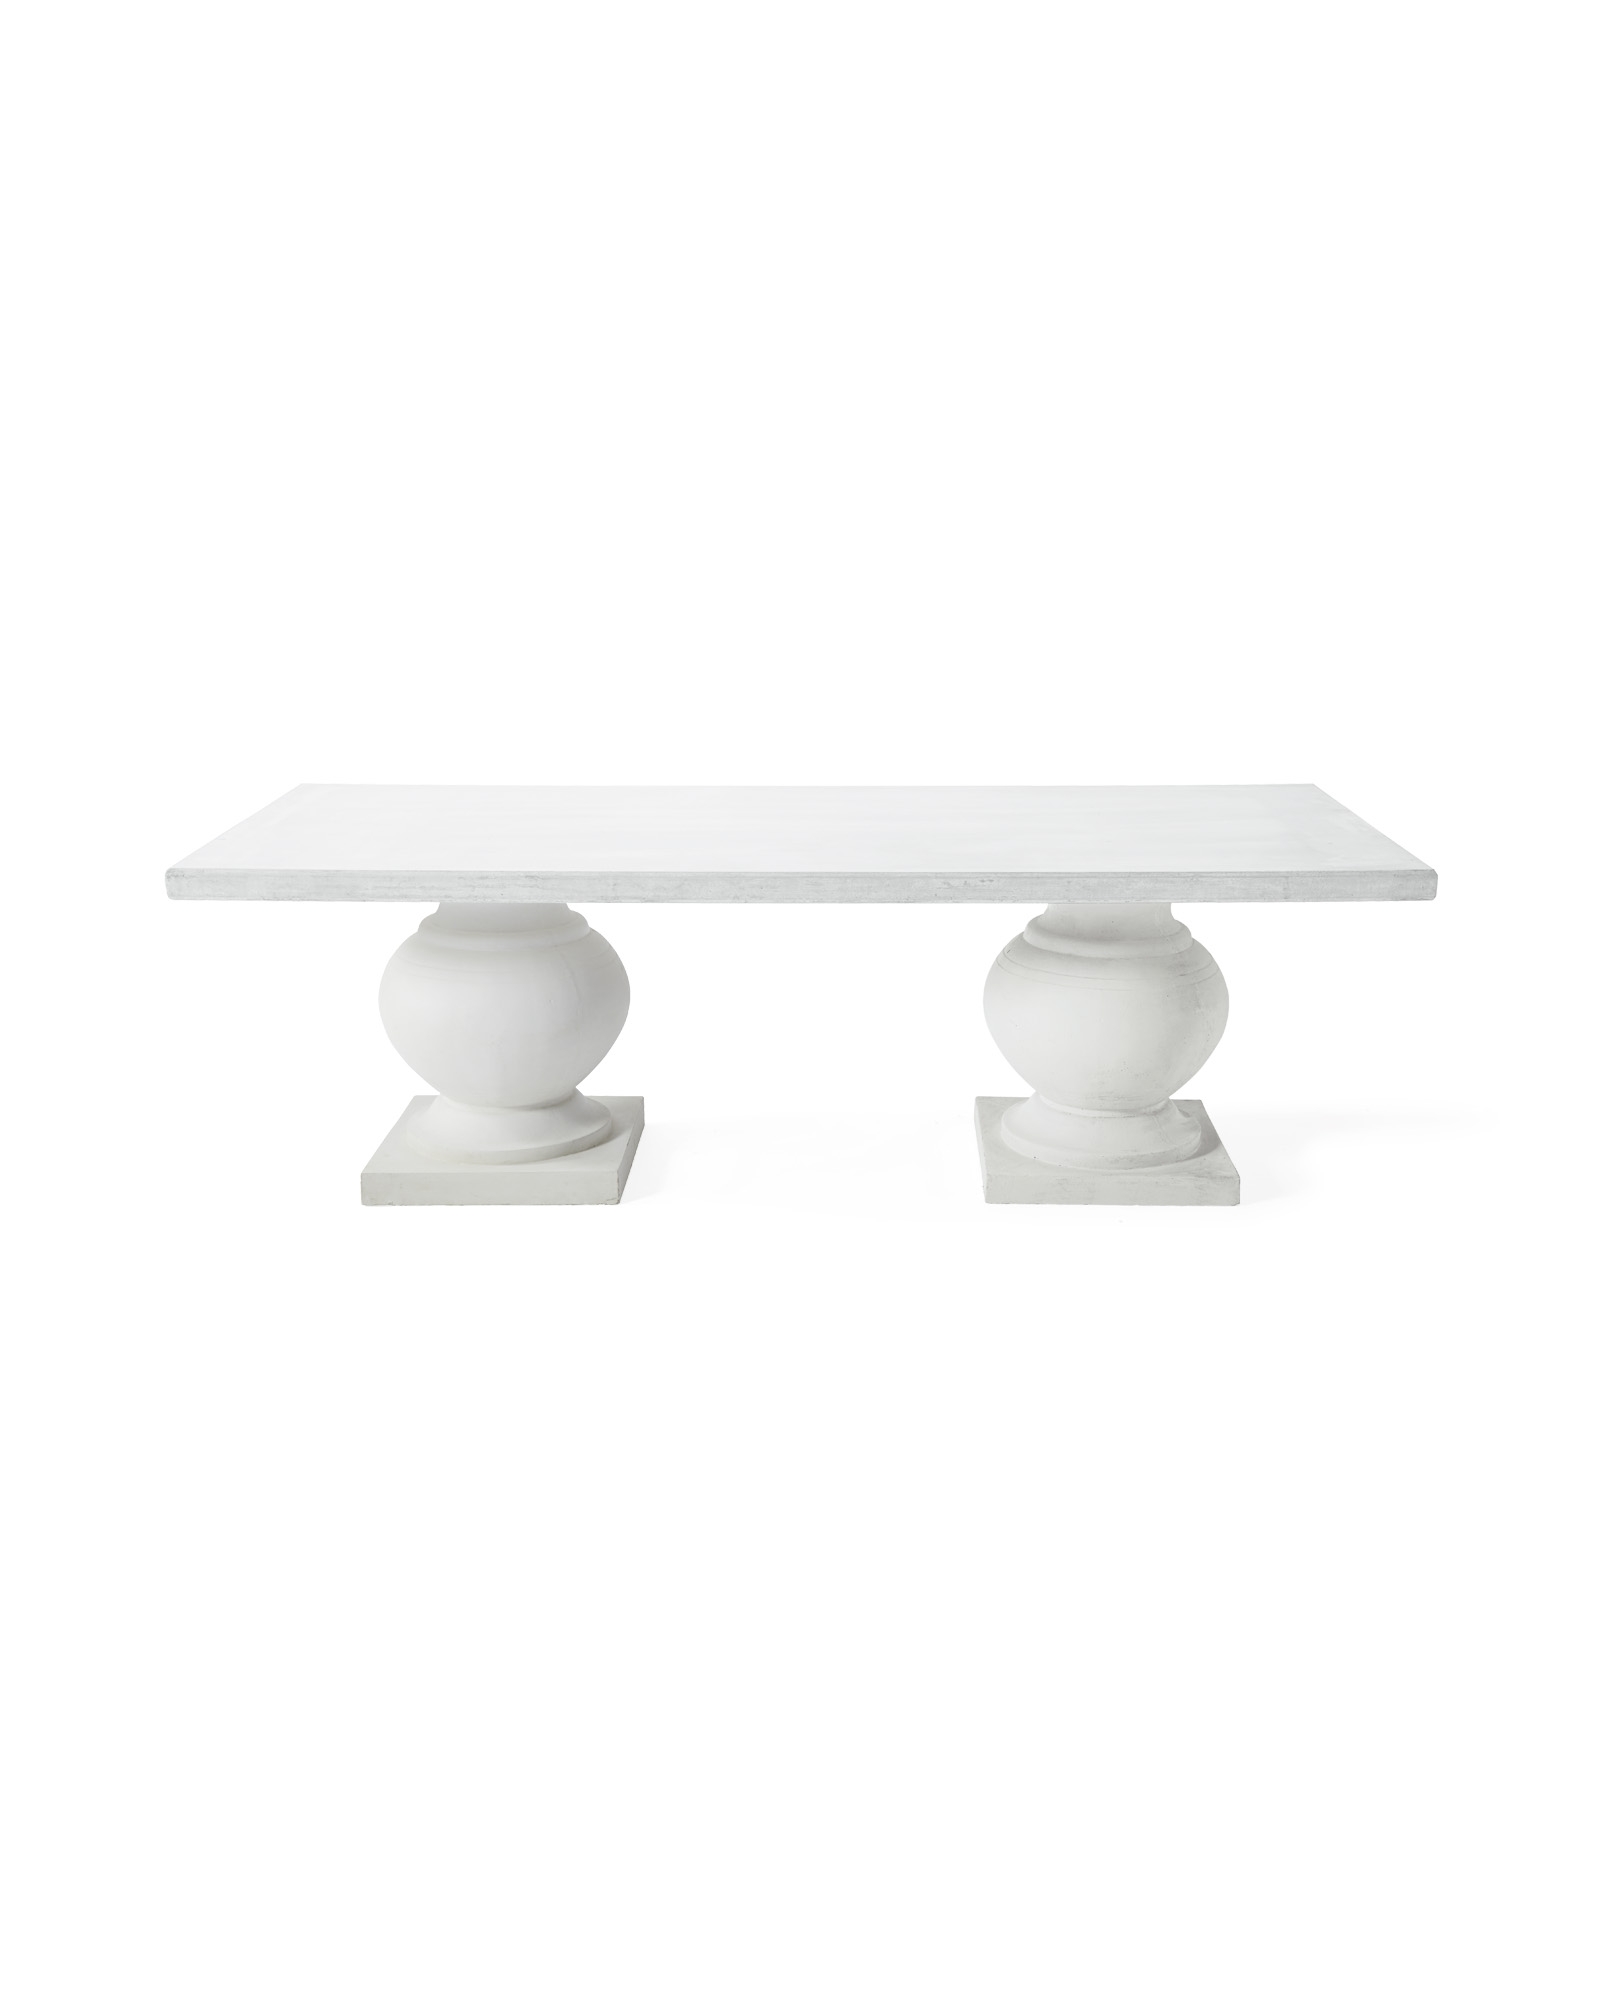 Terrace Dining Table - White/White - Image 0